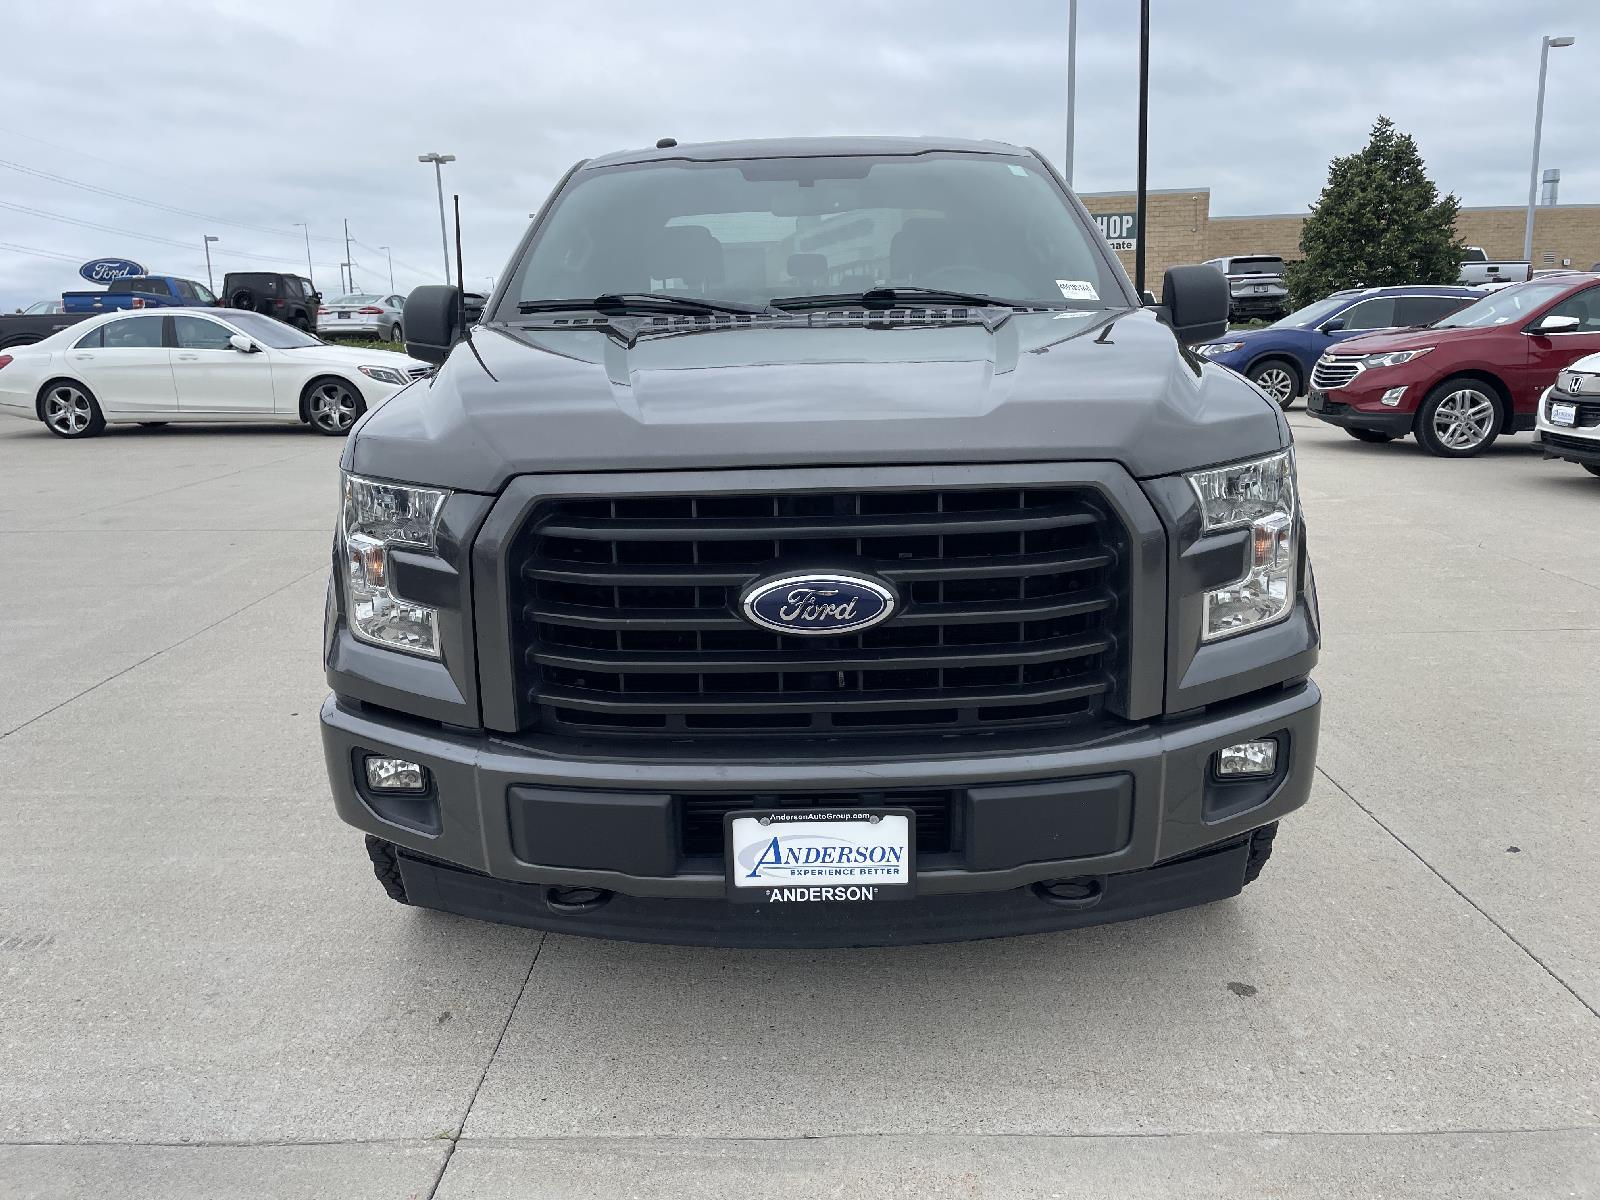 Used 2017 Ford F-150 XLT Crew Cab Truck for sale in Lincoln NE